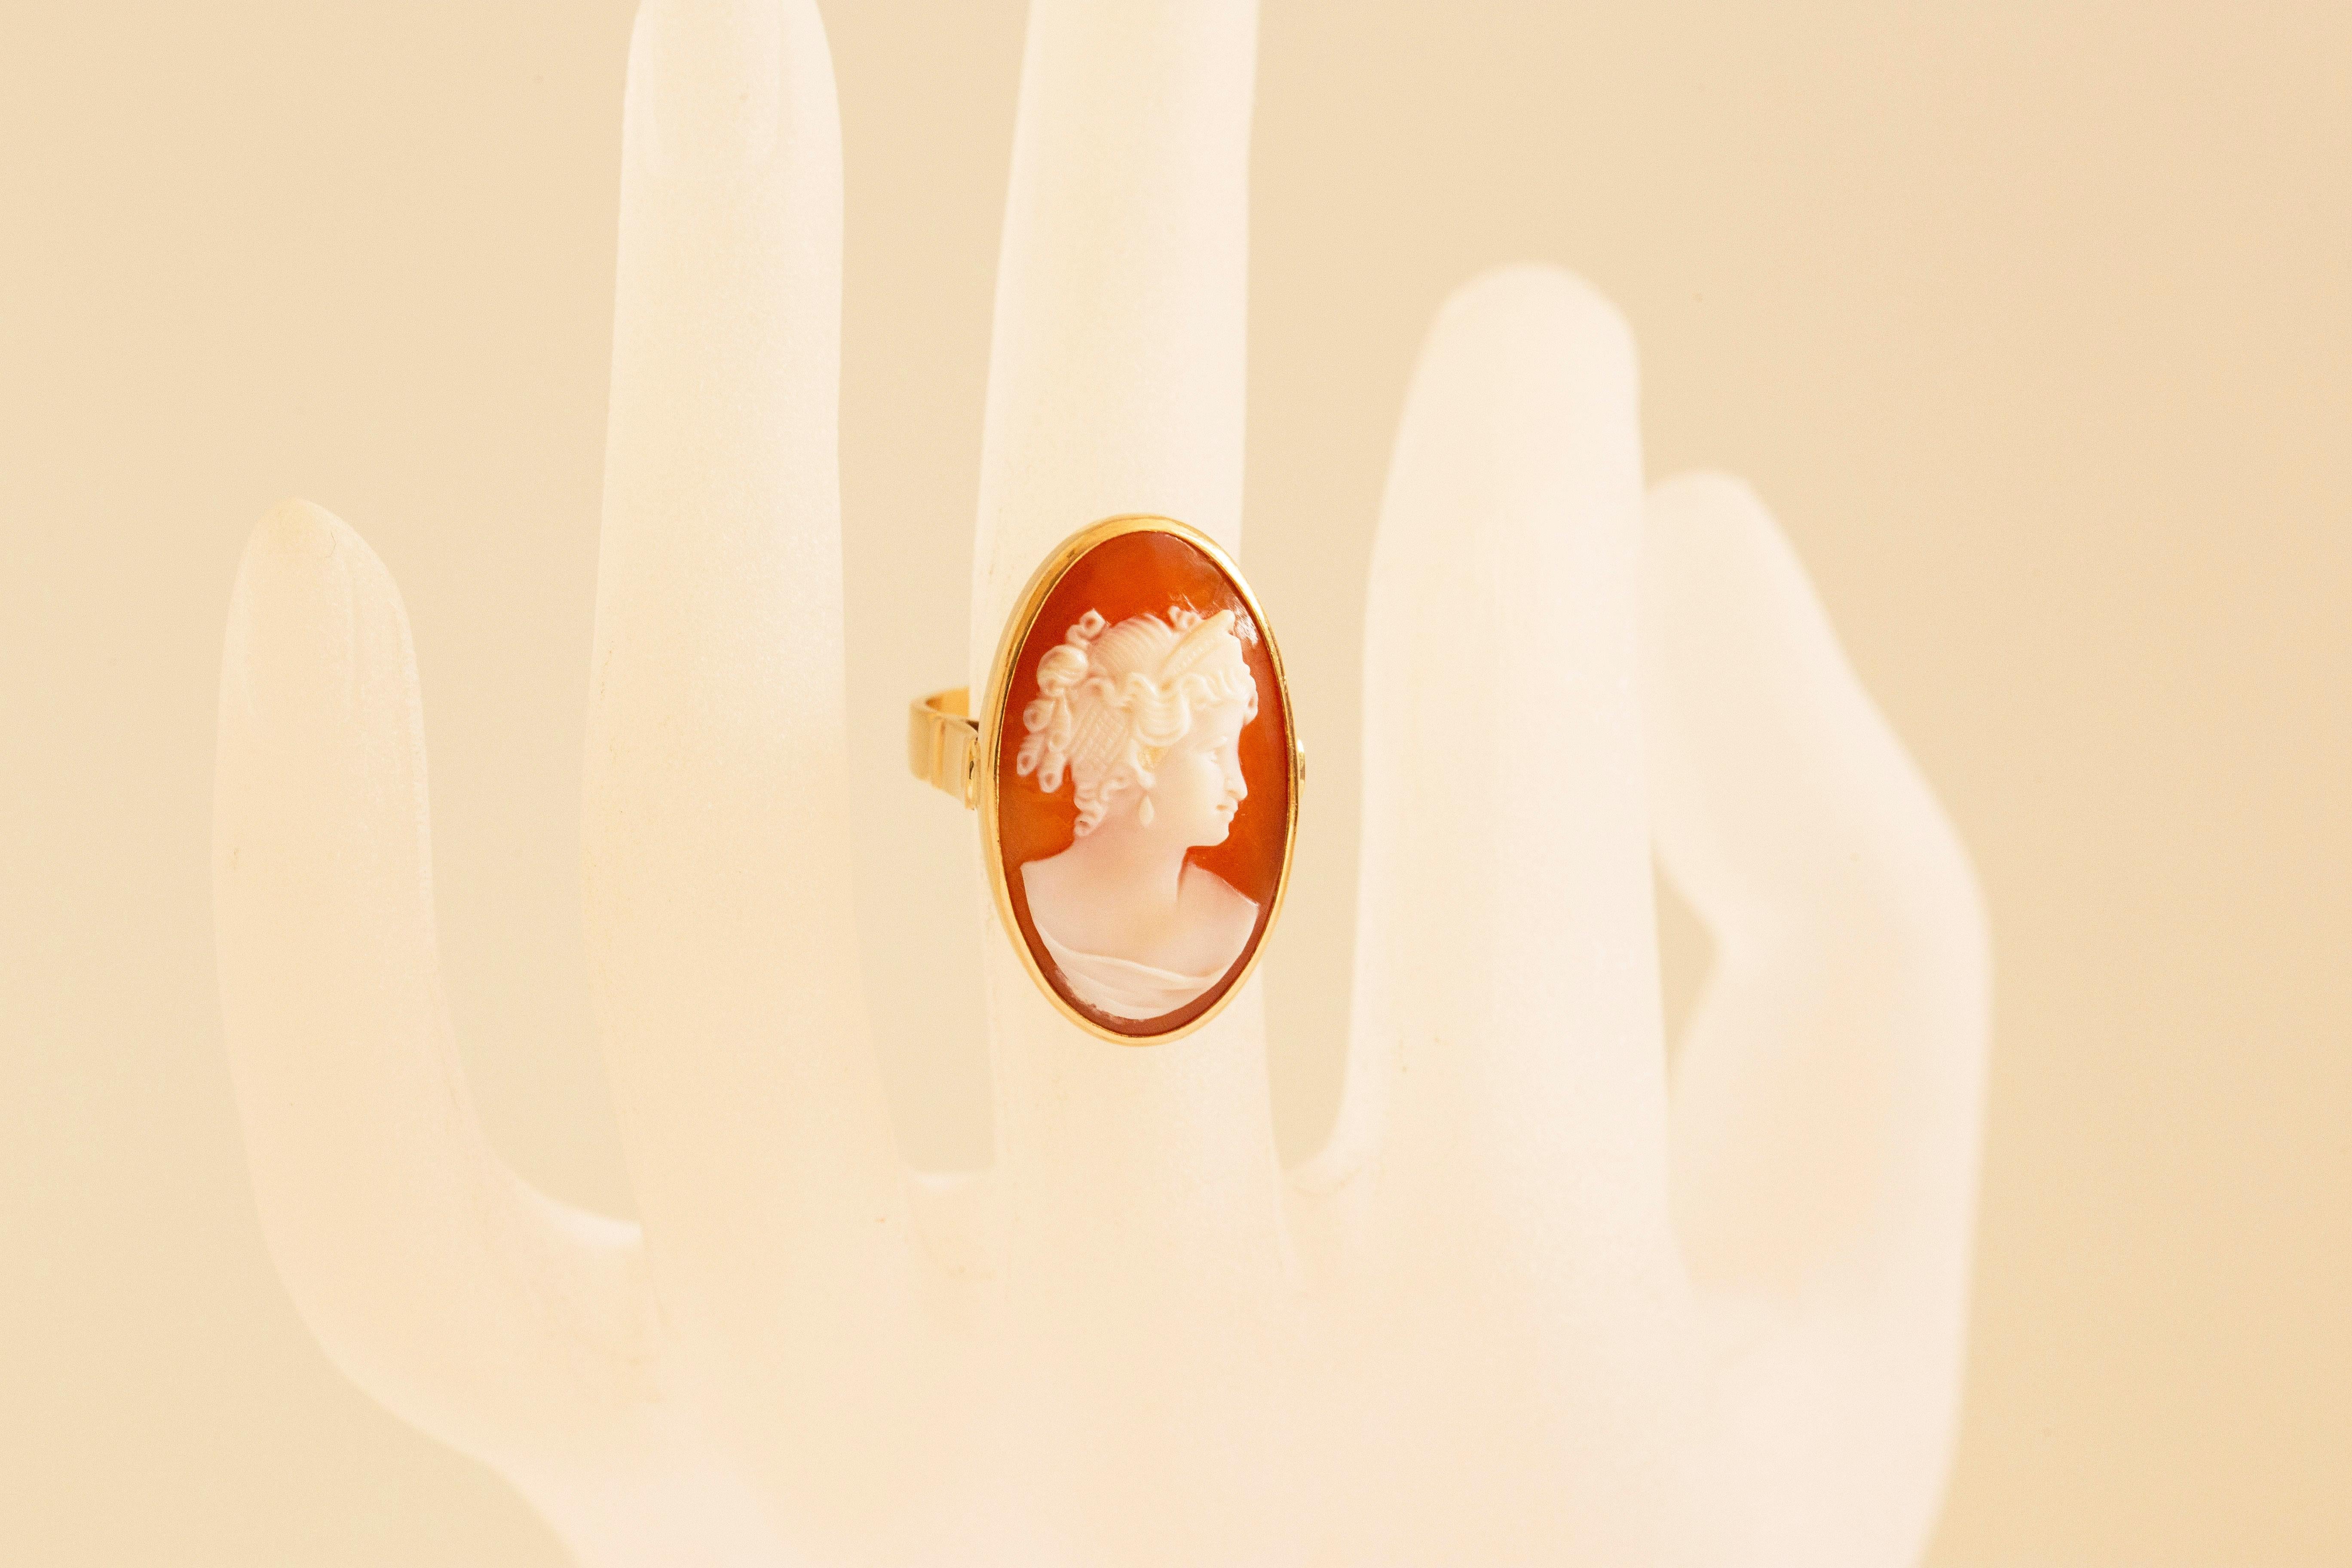 14 Karat Yellow Gold Ring with Hand Carved Shell Cameo with Female Silhouette For Sale 2